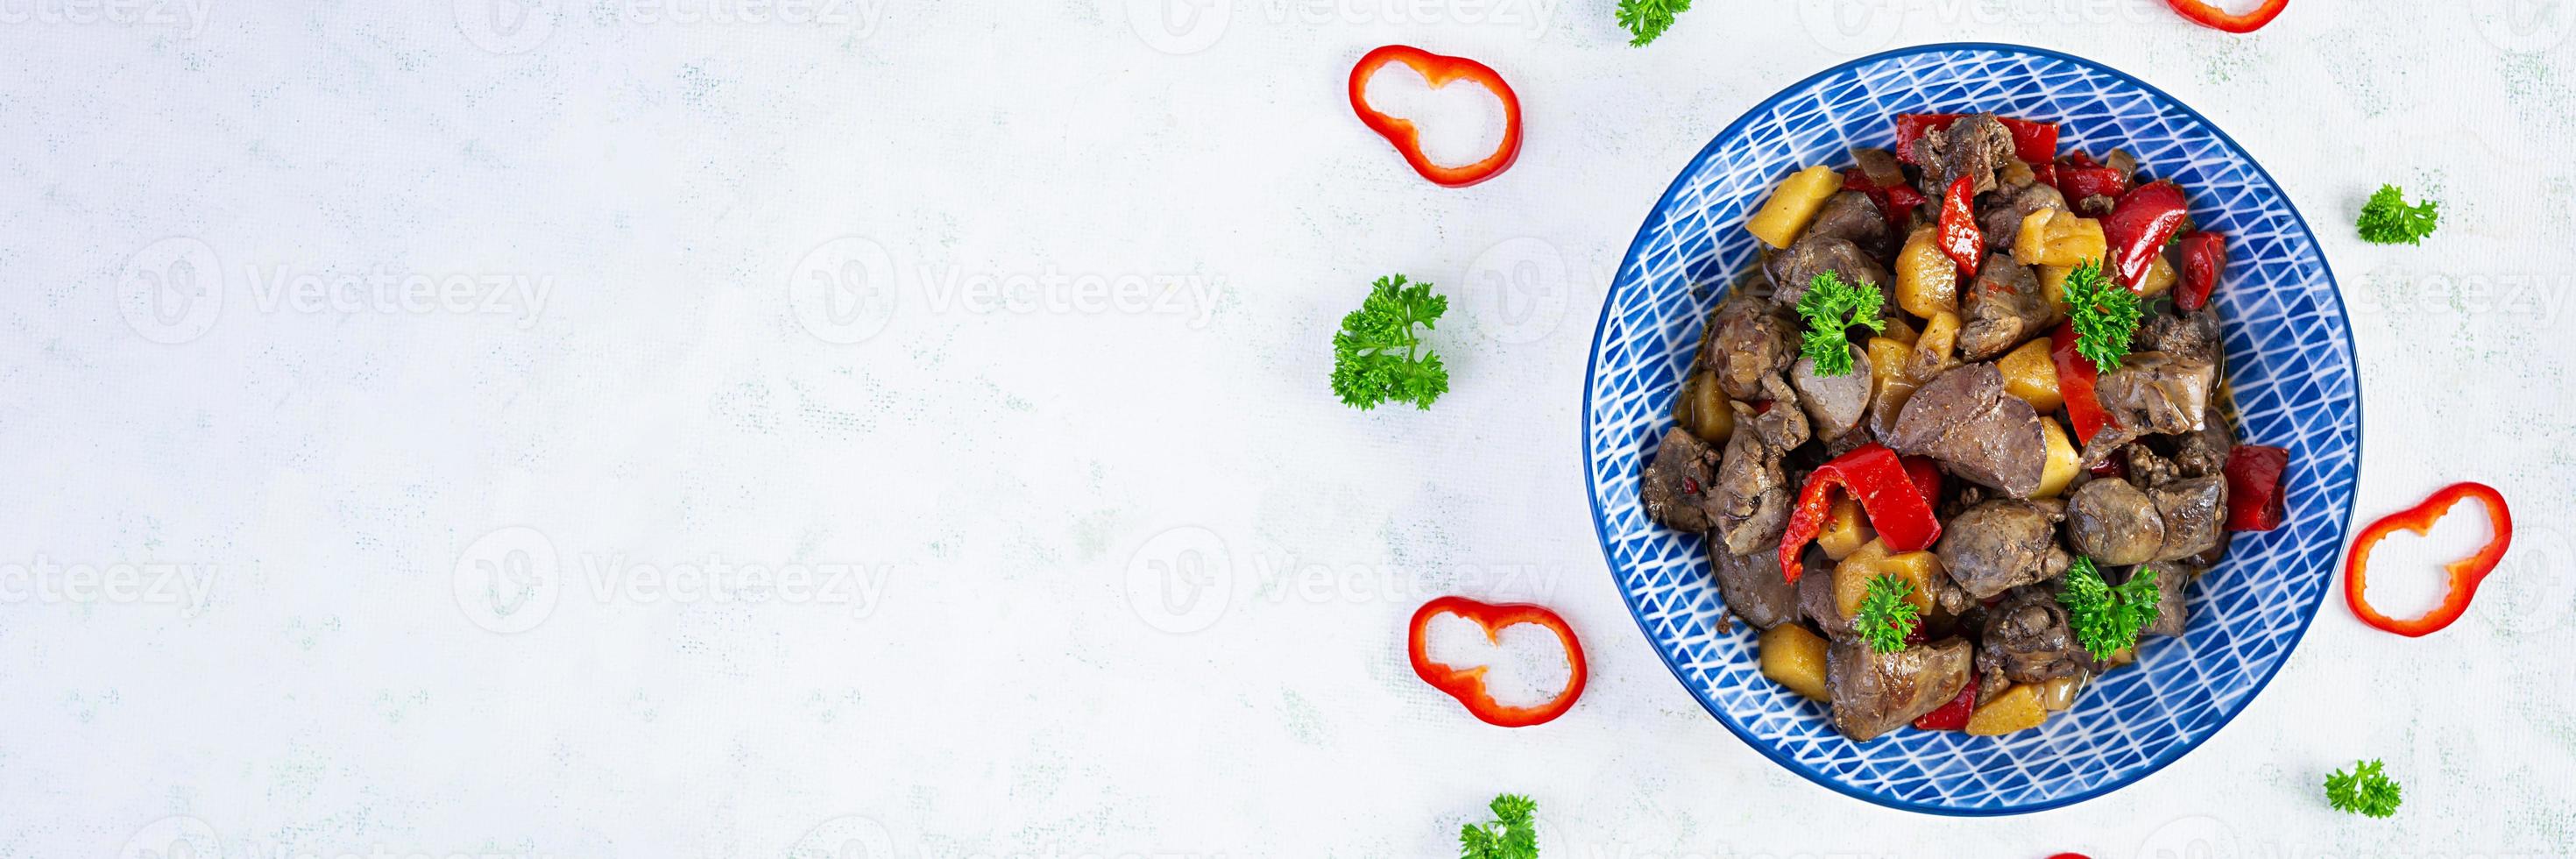 Delicious fried chicken liver with pepper, apples and herbs on light wooden background. Top view photo